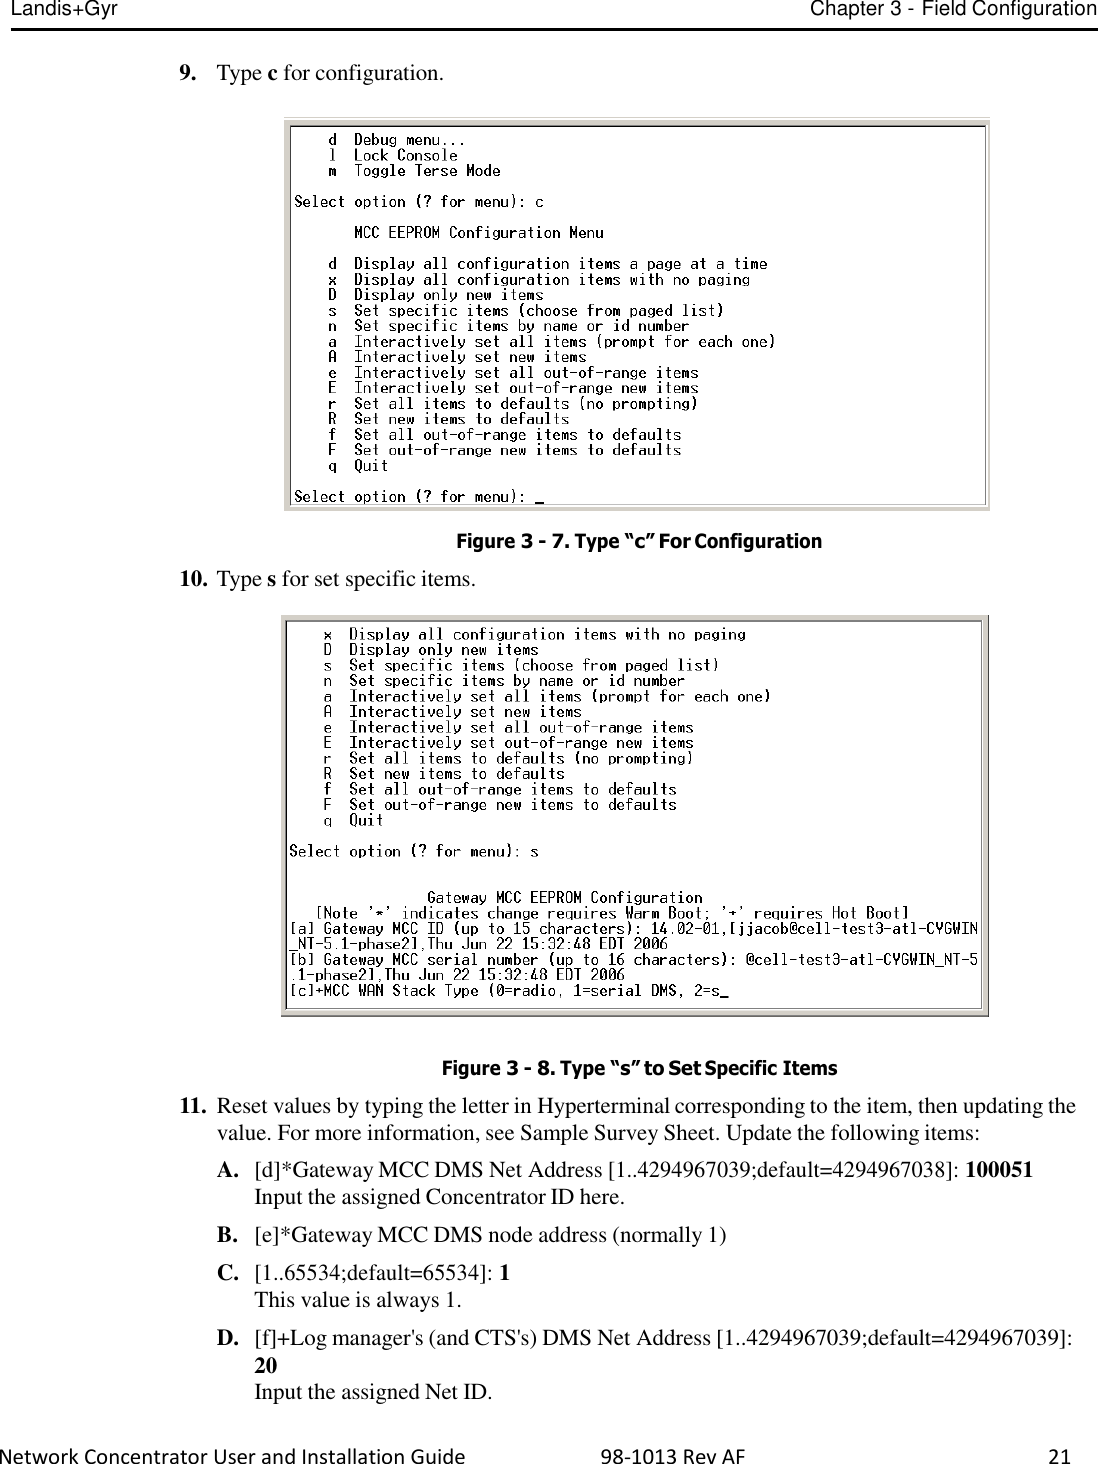 Landis+Gyr Chapter 3 - Field Configuration  Network Concentrator User and Installation Guide                          98-1013 Rev AF    21   9.   Type c for configuration.     Figure 3 - 7. Type “c” For Configuration  10. Type s for set specific items.     Figure 3 - 8. Type “s” to Set Specific Items  11.  Reset values by typing the letter in Hyperterminal corresponding to the item, then updating the value. For more information, see Sample Survey Sheet. Update the following items:  A.  [d]*Gateway MCC DMS Net Address [1..4294967039;default=4294967038]: 100051 Input the assigned Concentrator ID here.  B.   [e]*Gateway MCC DMS node address (normally 1)  C.  [1..65534;default=65534]: 1 This value is always 1.  D.  [f]+Log manager&apos;s (and CTS&apos;s) DMS Net Address [1..4294967039;default=4294967039]: 20 Input the assigned Net ID. 